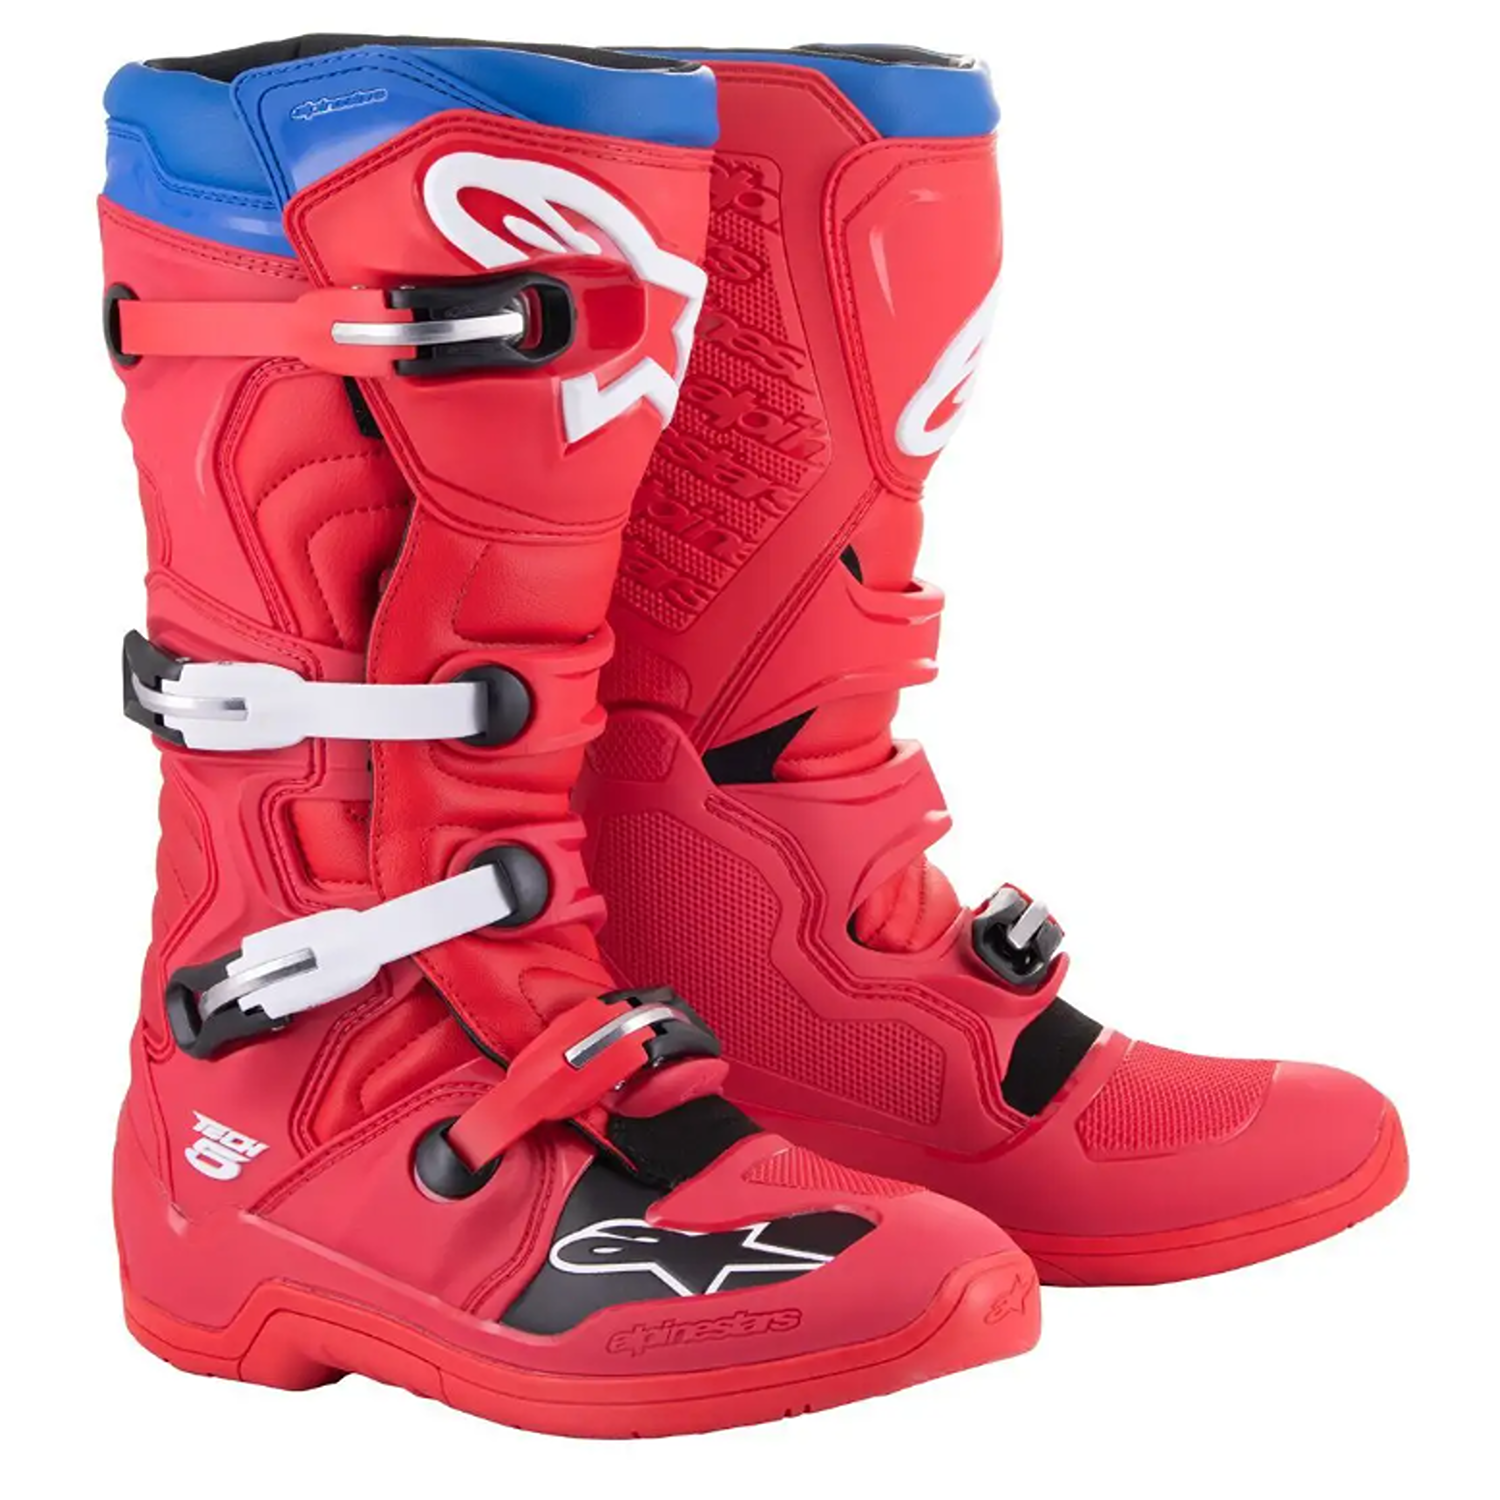 Image of EU Alpinestars Tech 5 Boots Bright Red Dark Red Blue Taille US 15